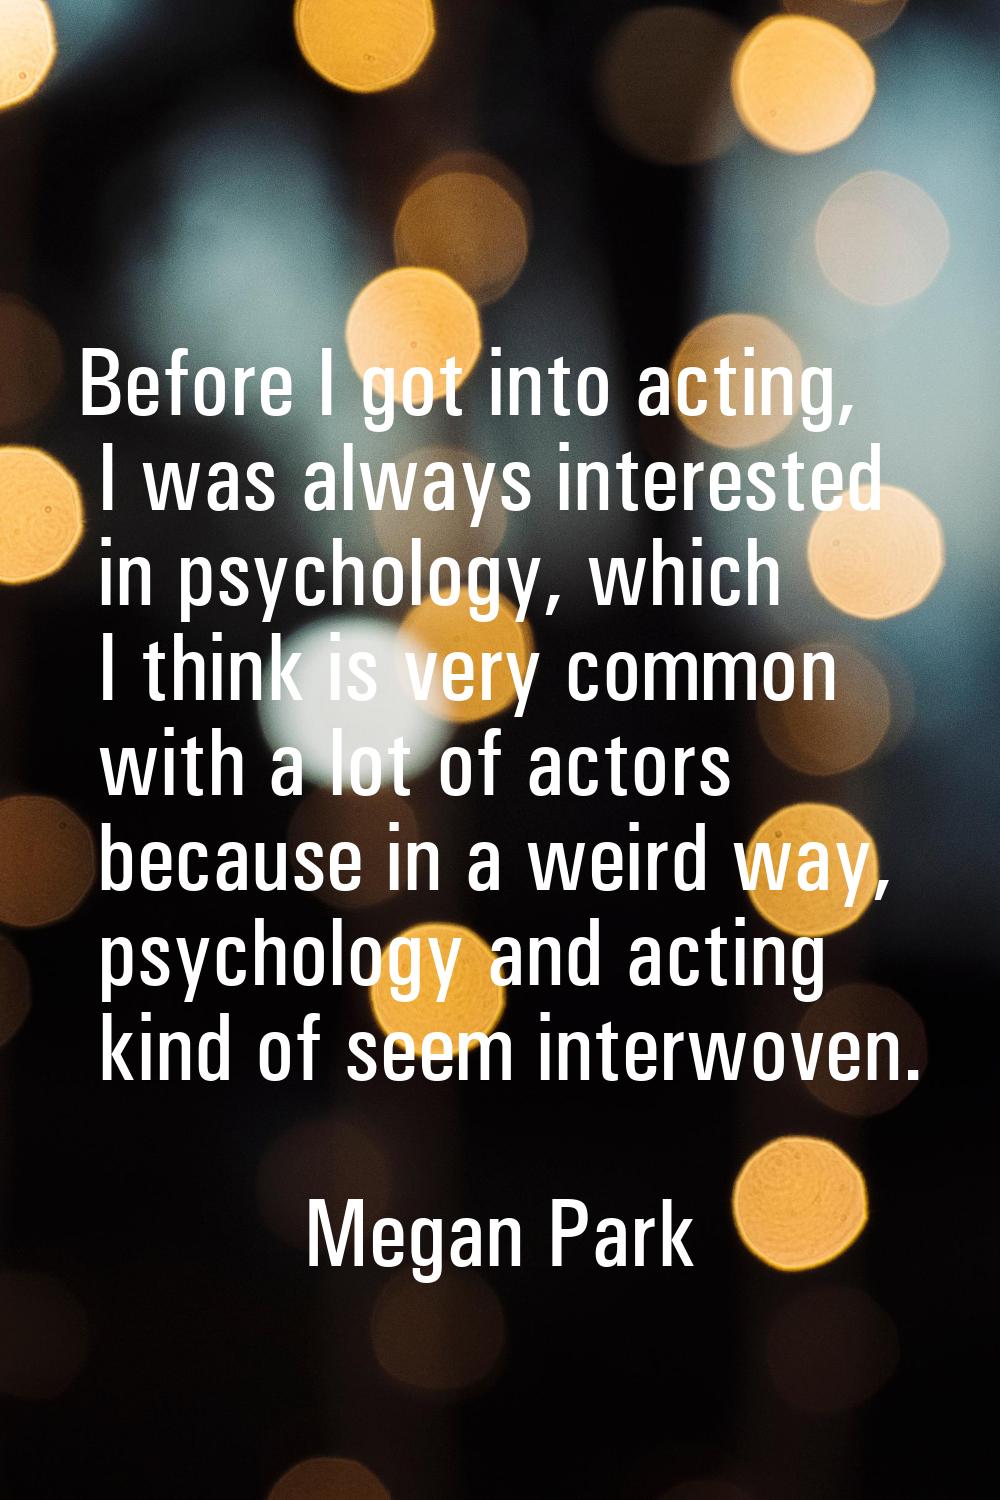 Before I got into acting, I was always interested in psychology, which I think is very common with 